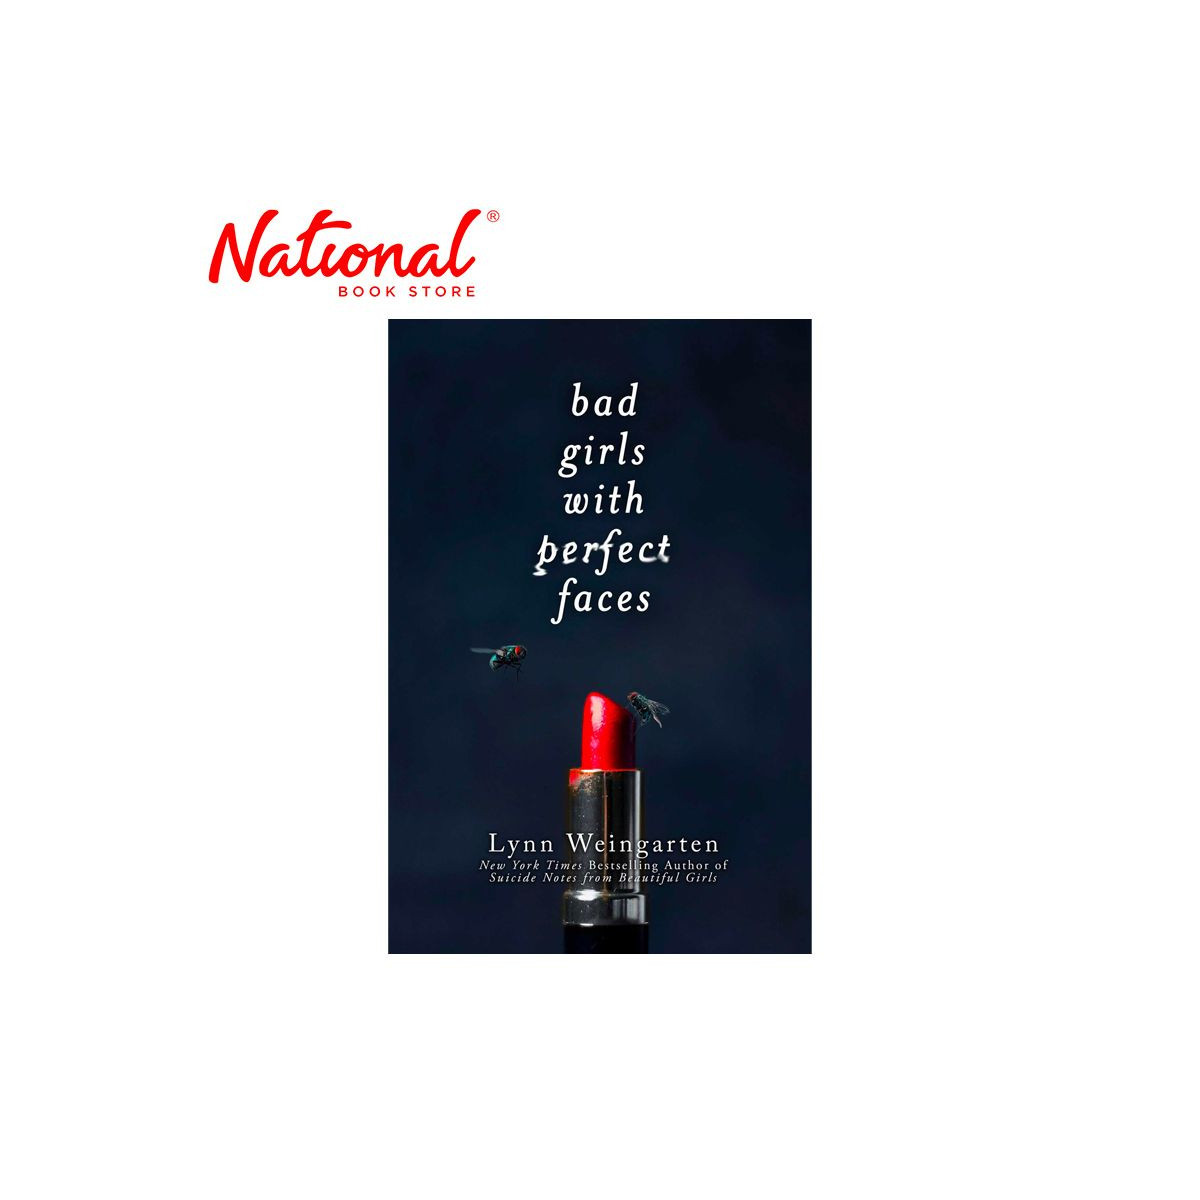 Bad Girls With Perfect Faces Trade Paperback by Lynn Weingarten - Teens Fiction